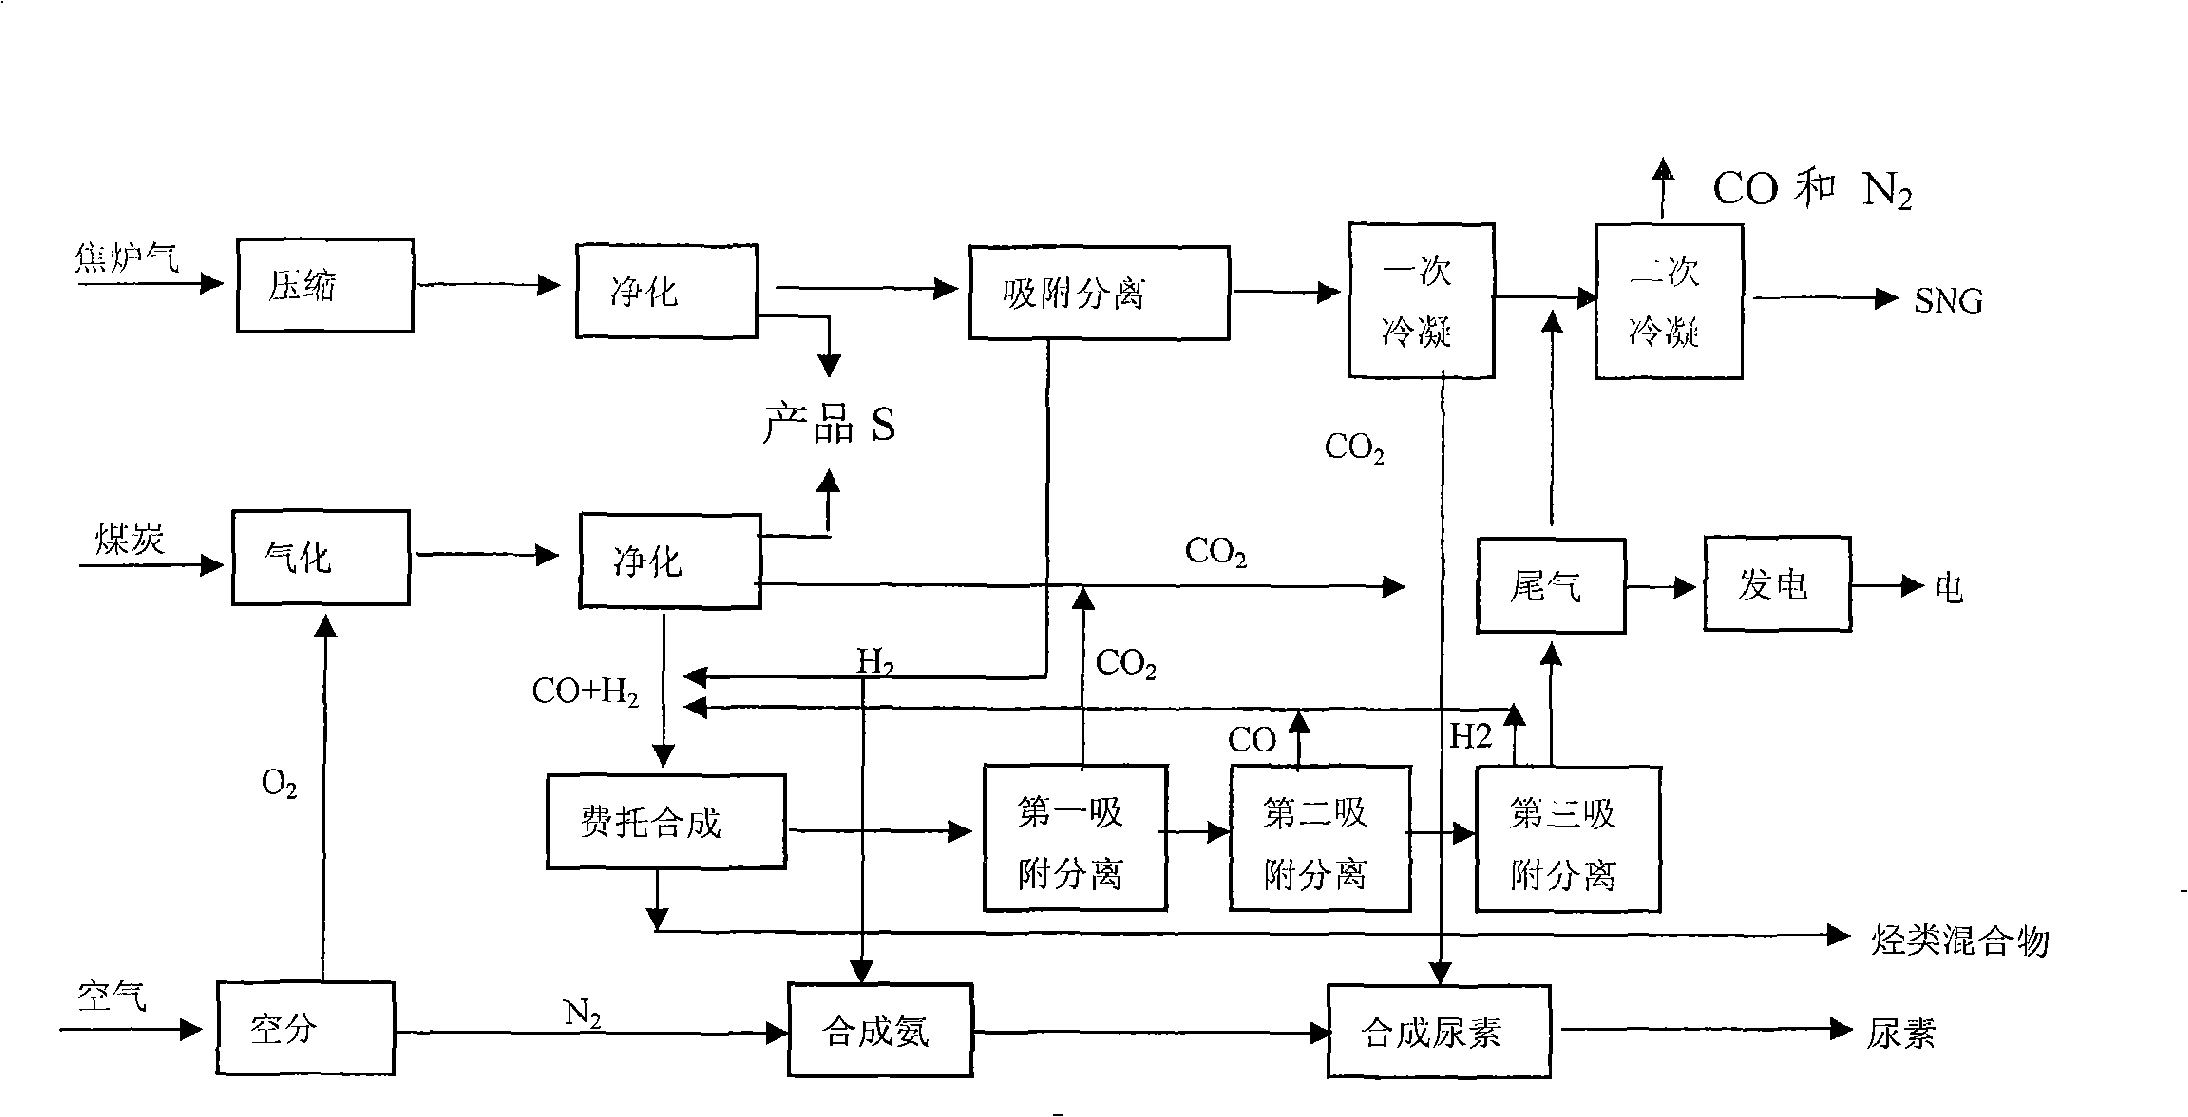 Poly-generation technique for using coal gas and coke oven gas as raw materials